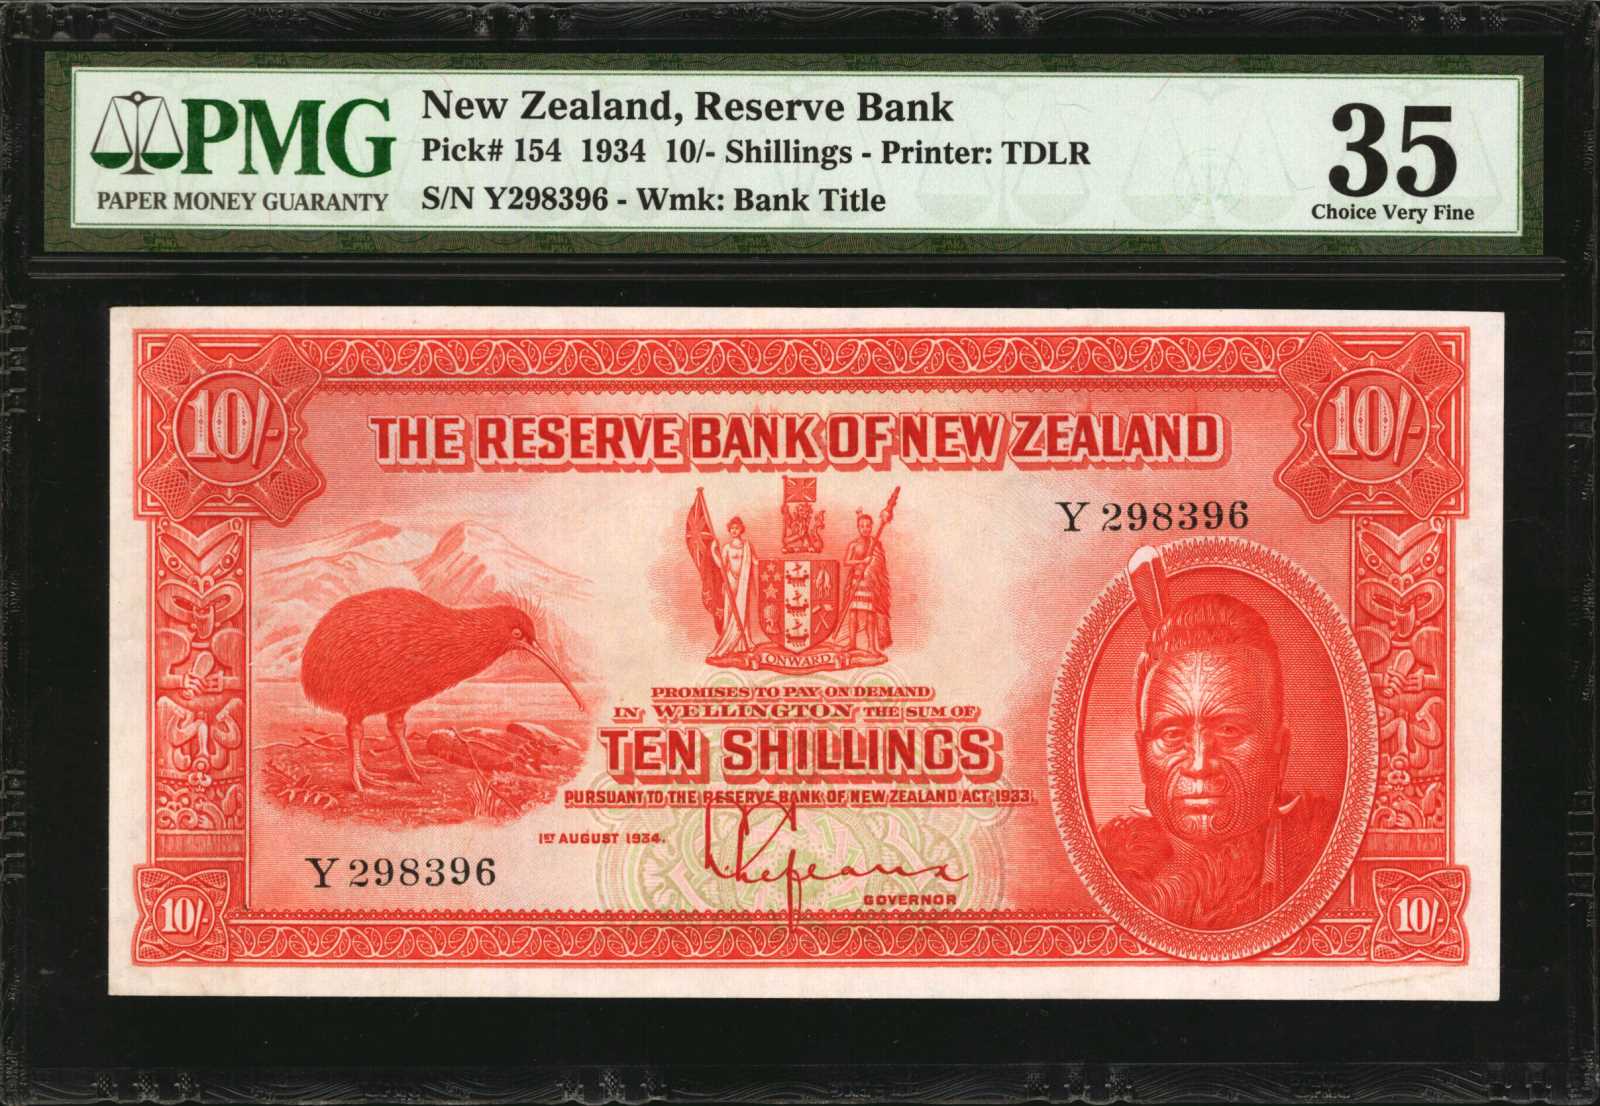 NEW ZEALAND. Reserve Bank of New Zealand. 10 Shillings